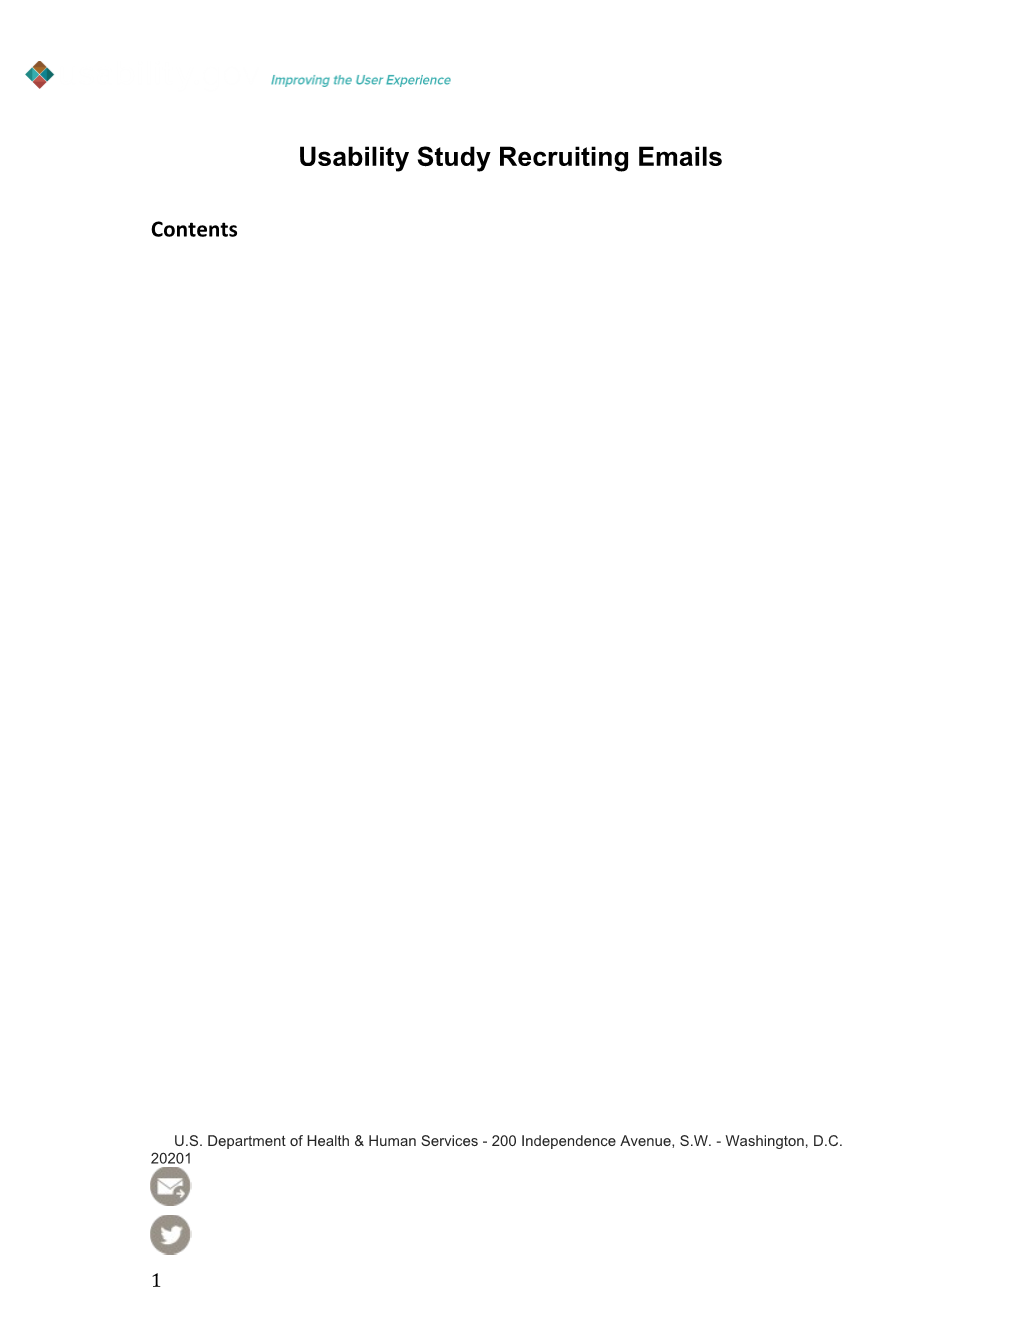 Usability Study Recruiting Emails